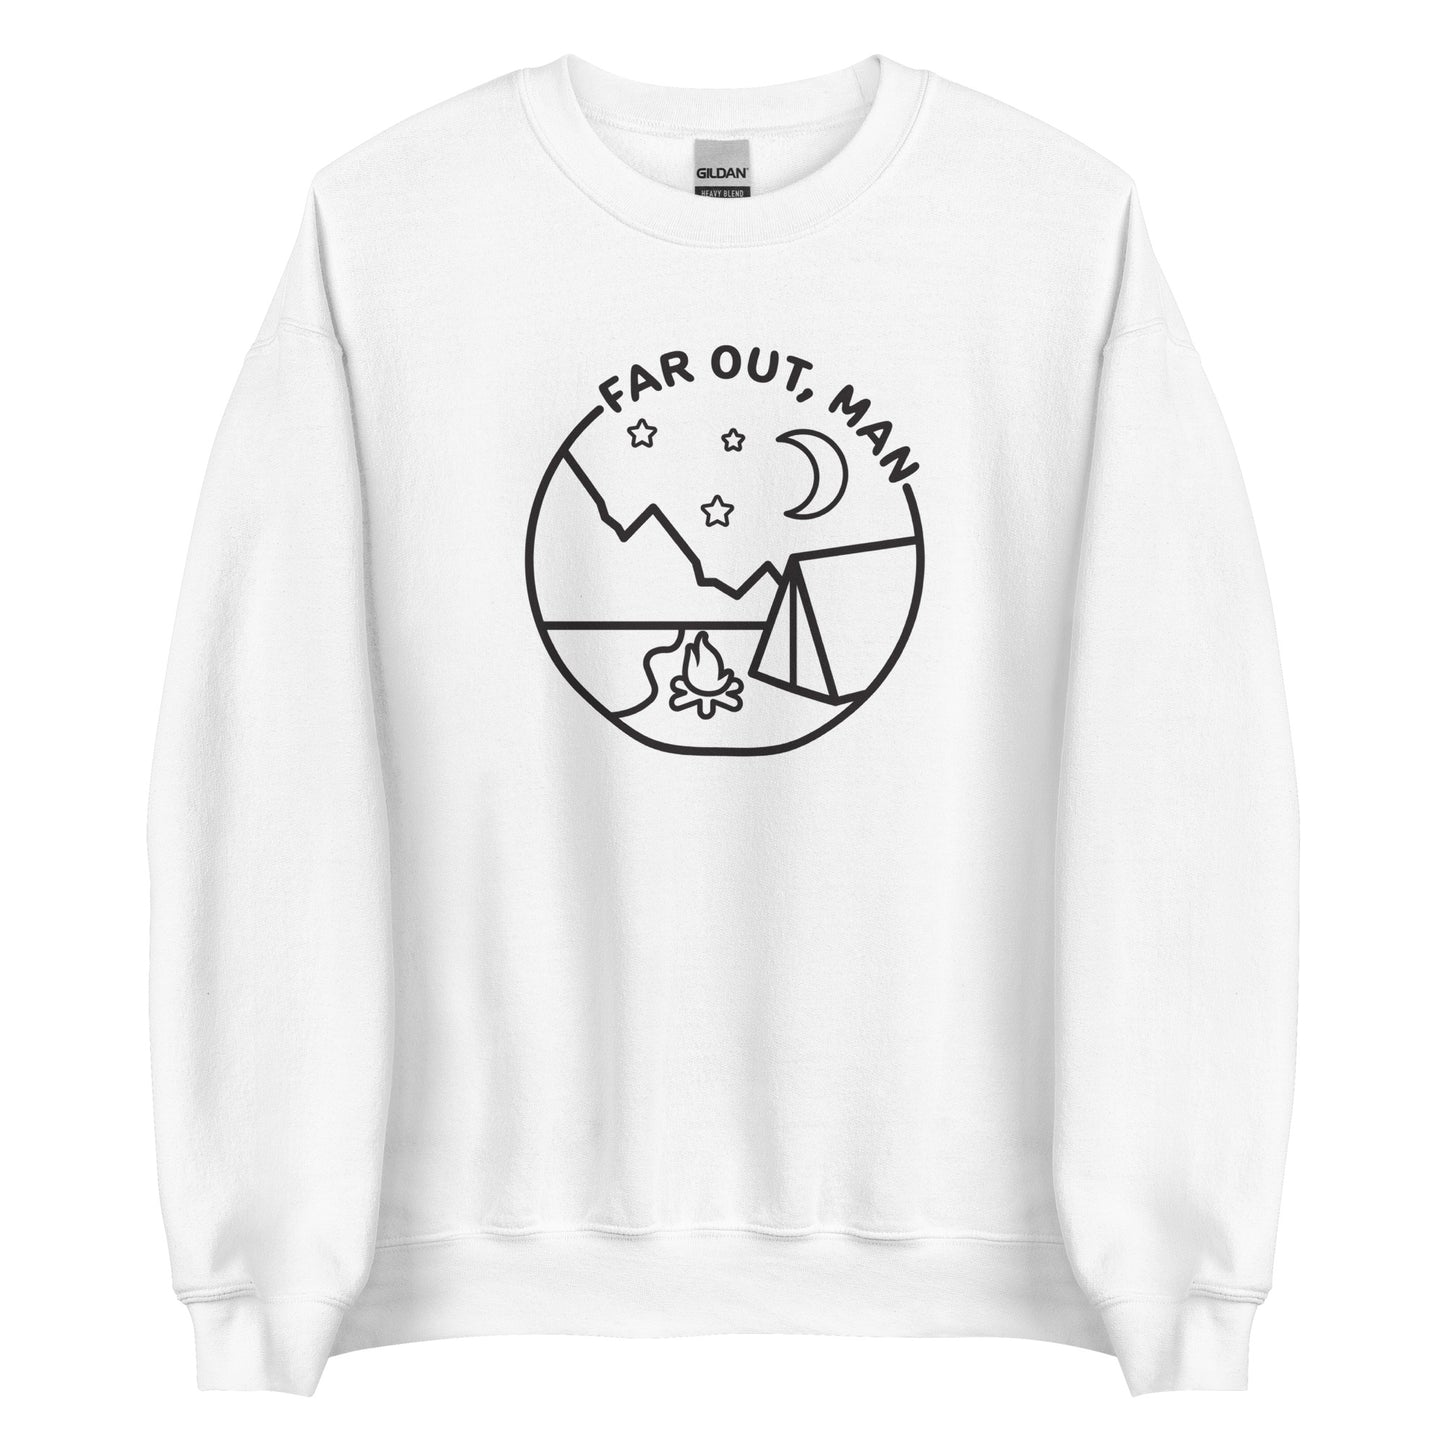 A white crewneck sweatshirt featuring a black lineart illustration of a tent and campfire under a night sky. Text in an arc above the illustration reads "Far out, man"